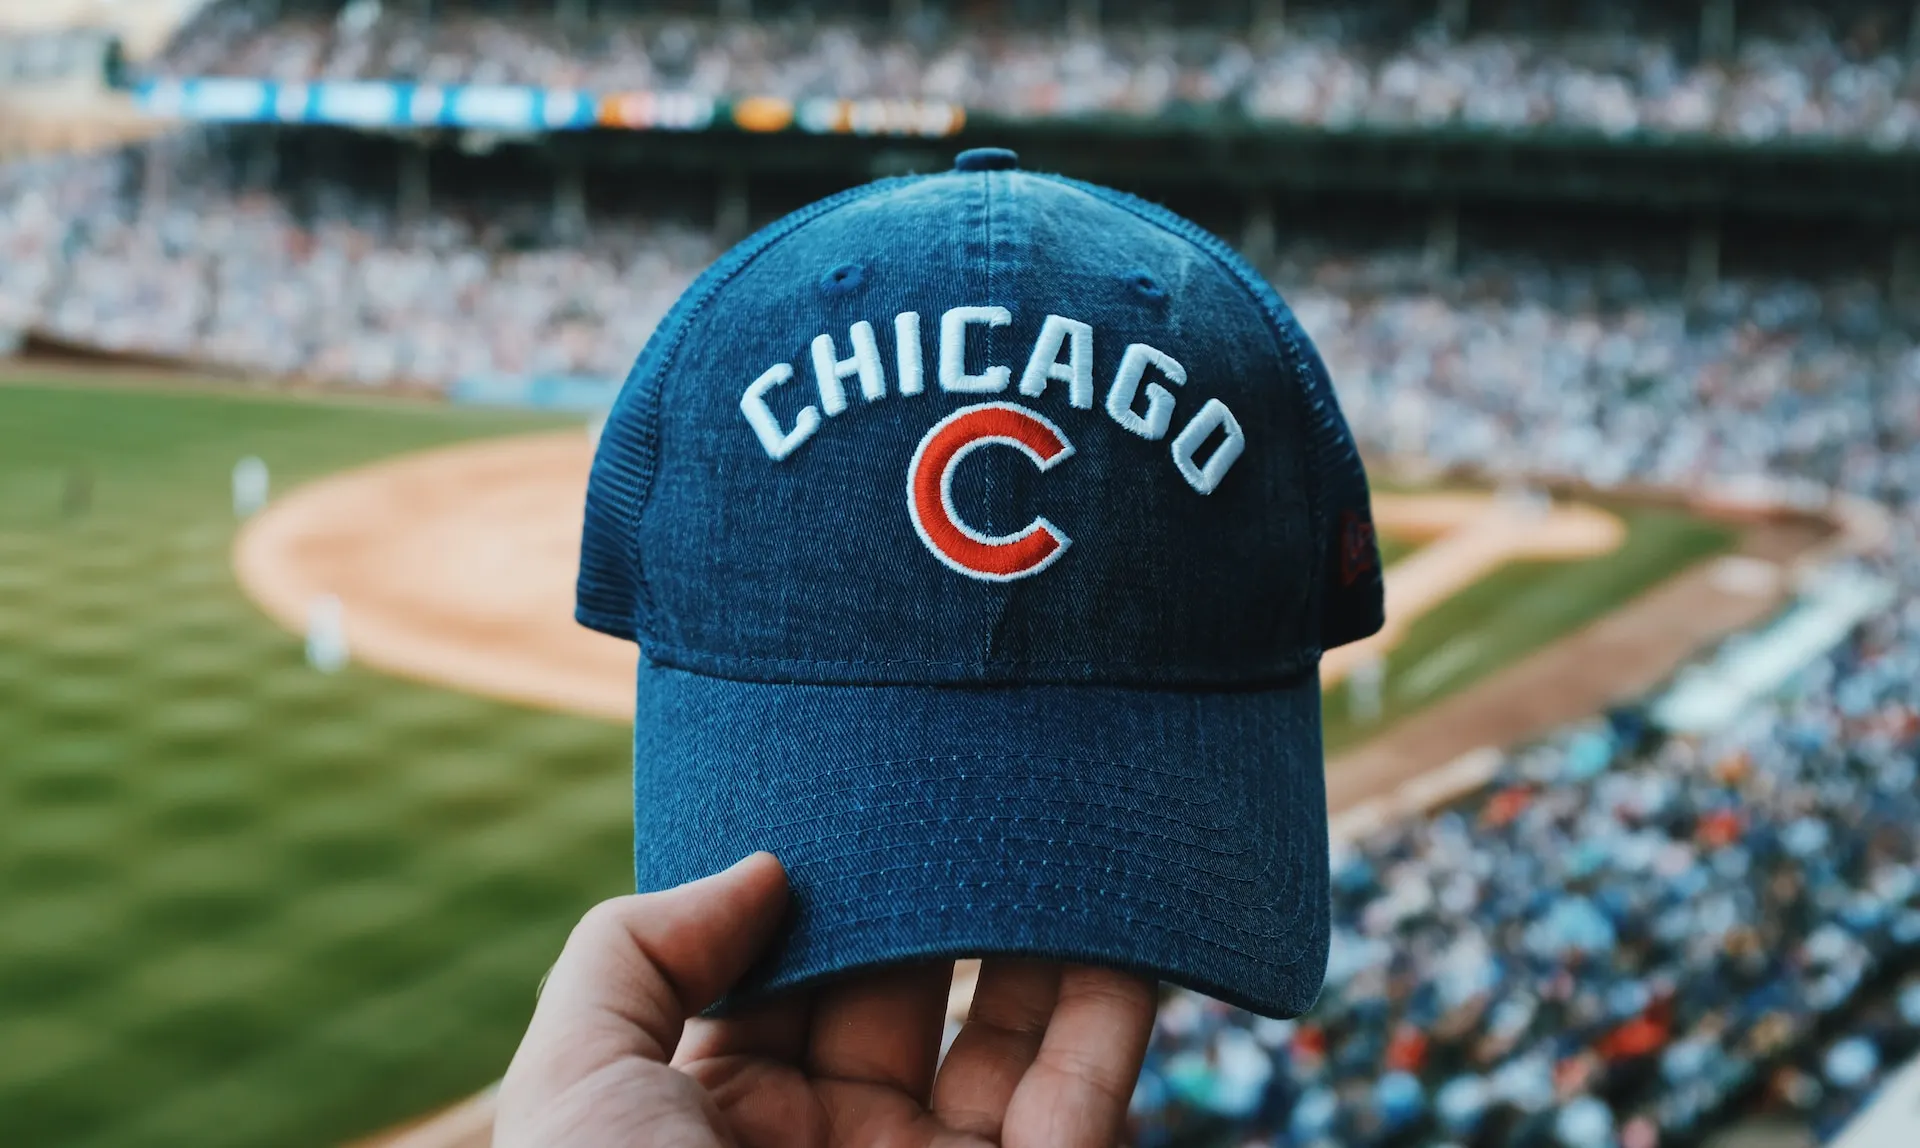 Chicago Cubs Are Officially Sponsored By a Cannabis Company